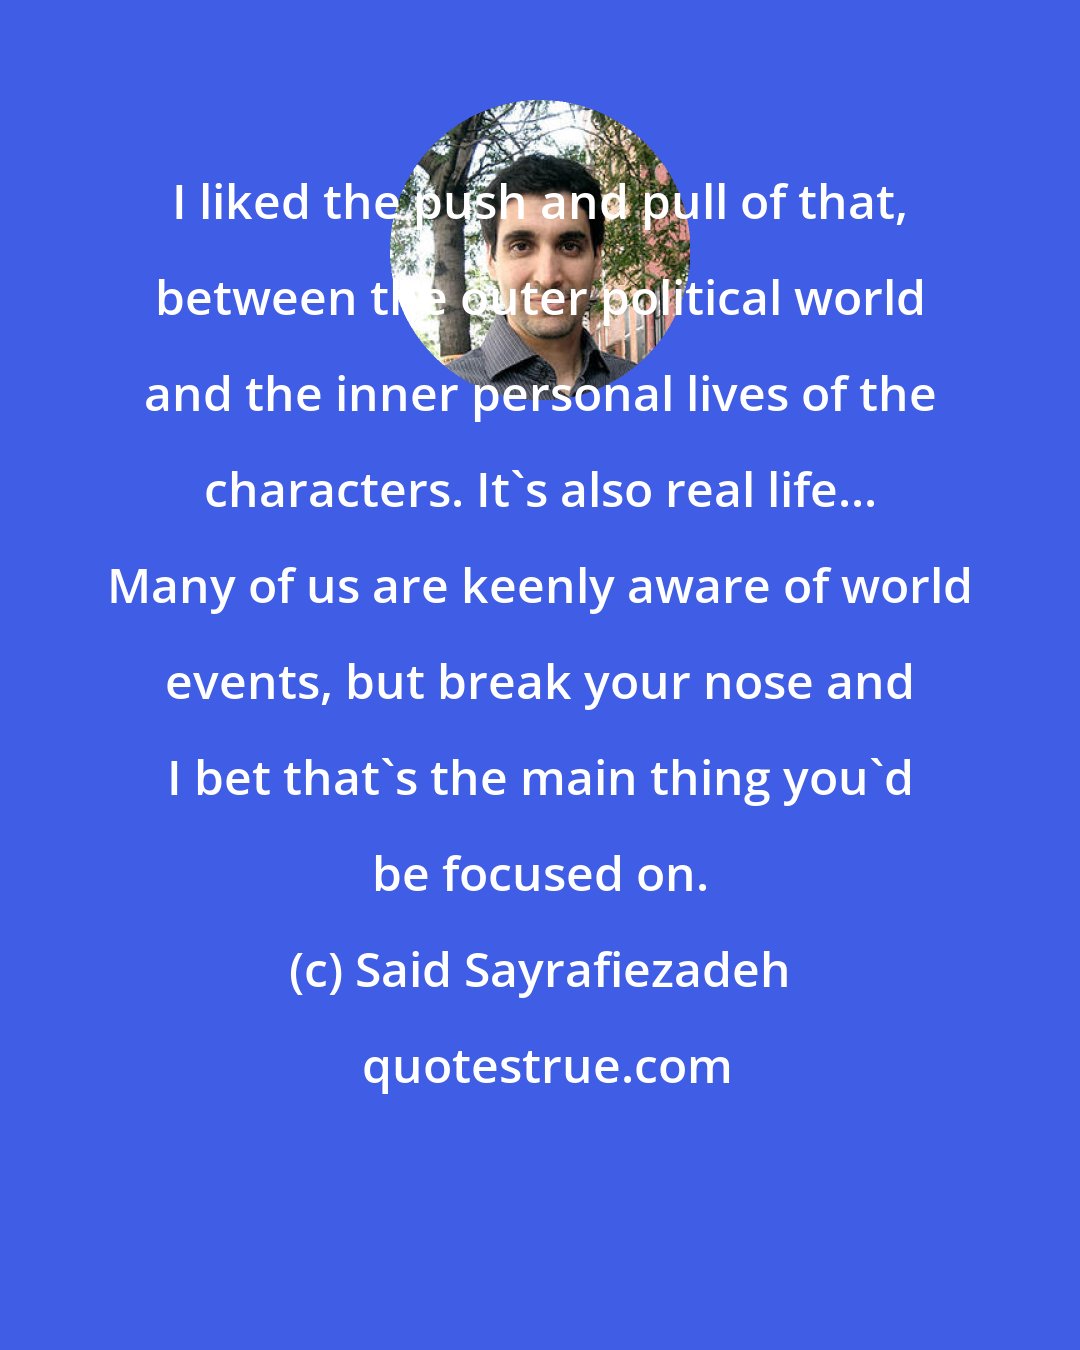 Said Sayrafiezadeh: I liked the push and pull of that, between the outer political world and the inner personal lives of the characters. It's also real life... Many of us are keenly aware of world events, but break your nose and I bet that's the main thing you'd be focused on.